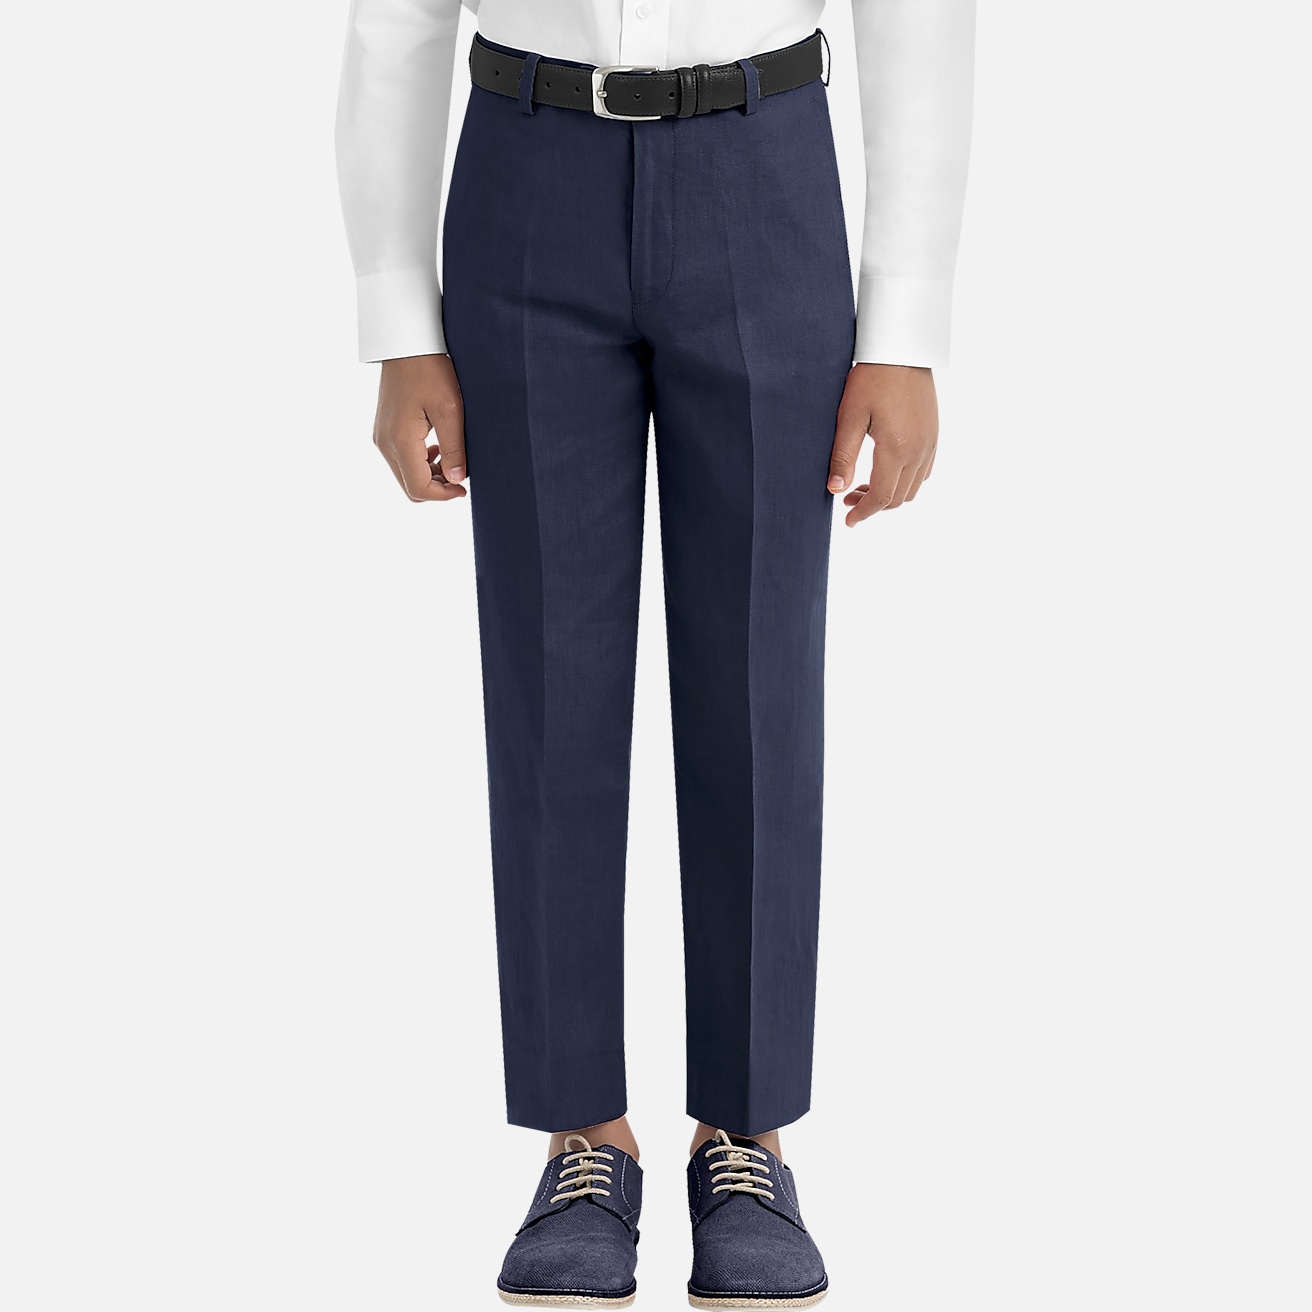 https://image.menswearhouse.com/is/image/TMW/TMW_3VFR_01_LAUREN_BY_RALPH_LAUREN_BOYS_SUITS_SEPARATES_NAVY_SOLID_MAIN?imPolicy=pdp-mob-2x